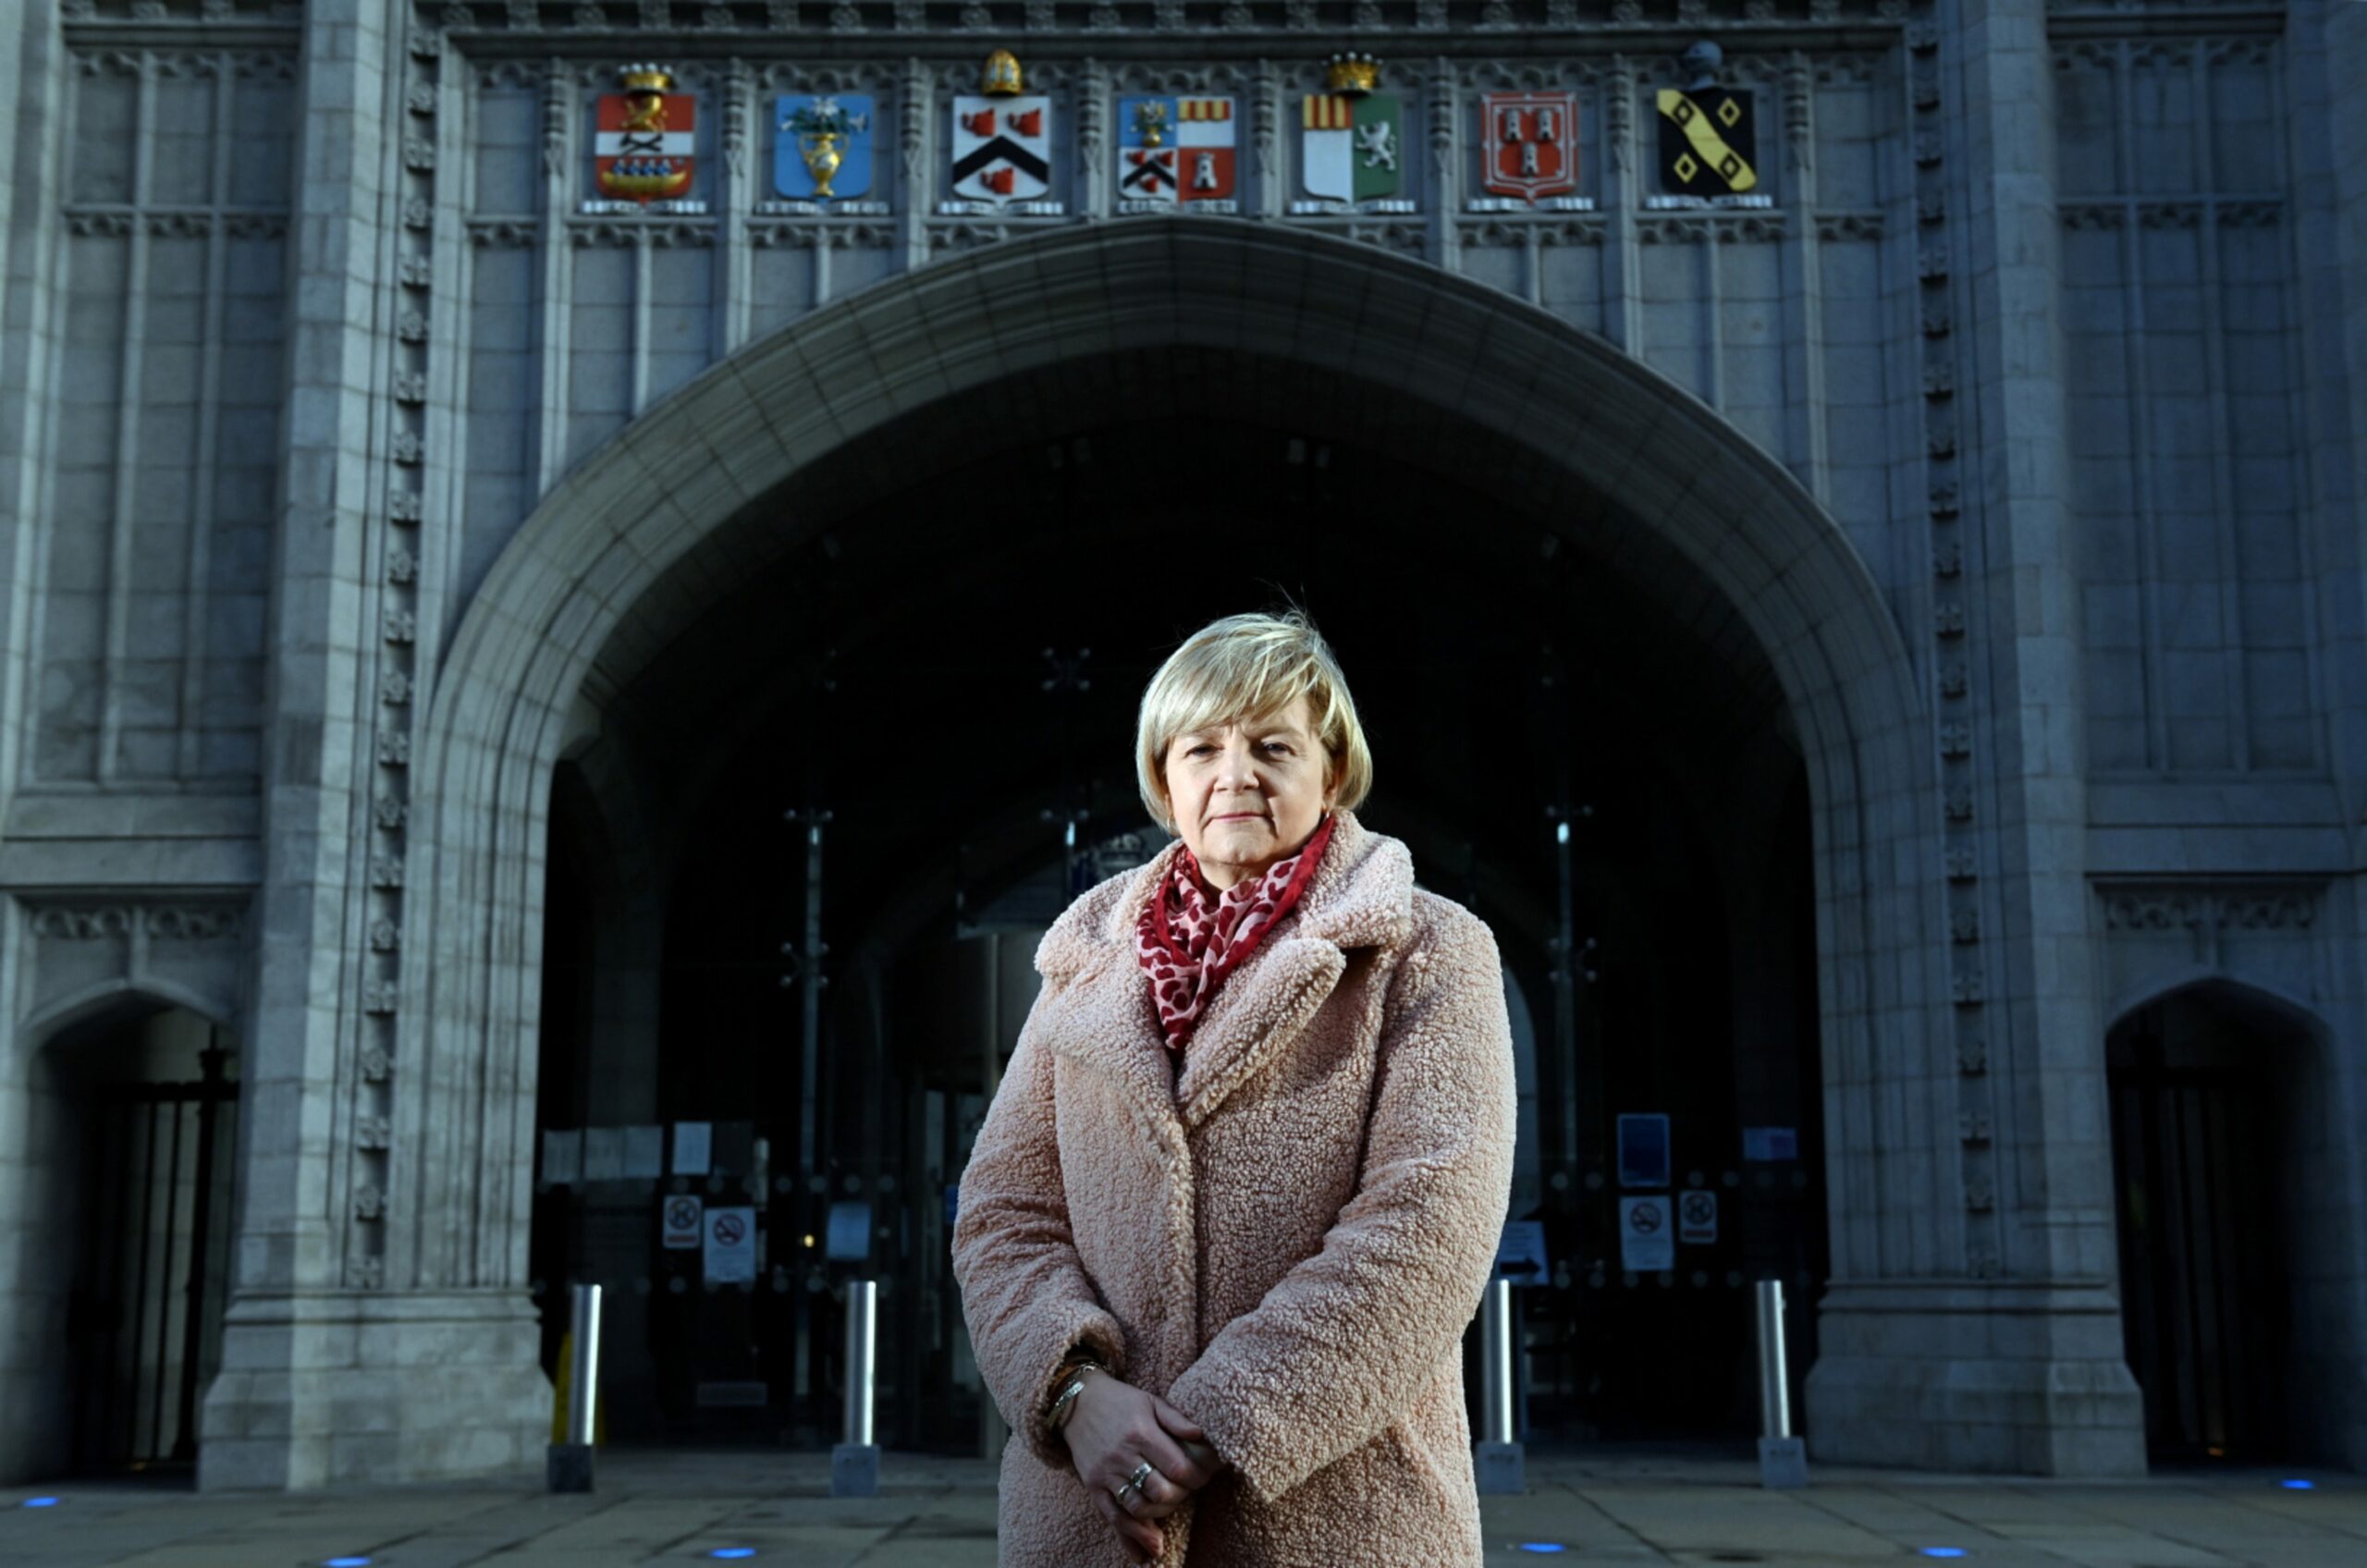 Council leader Jenny Laing on stepping down from Aberdeen City Council after 15 years. Picture by Kami Thomson/DCT Media